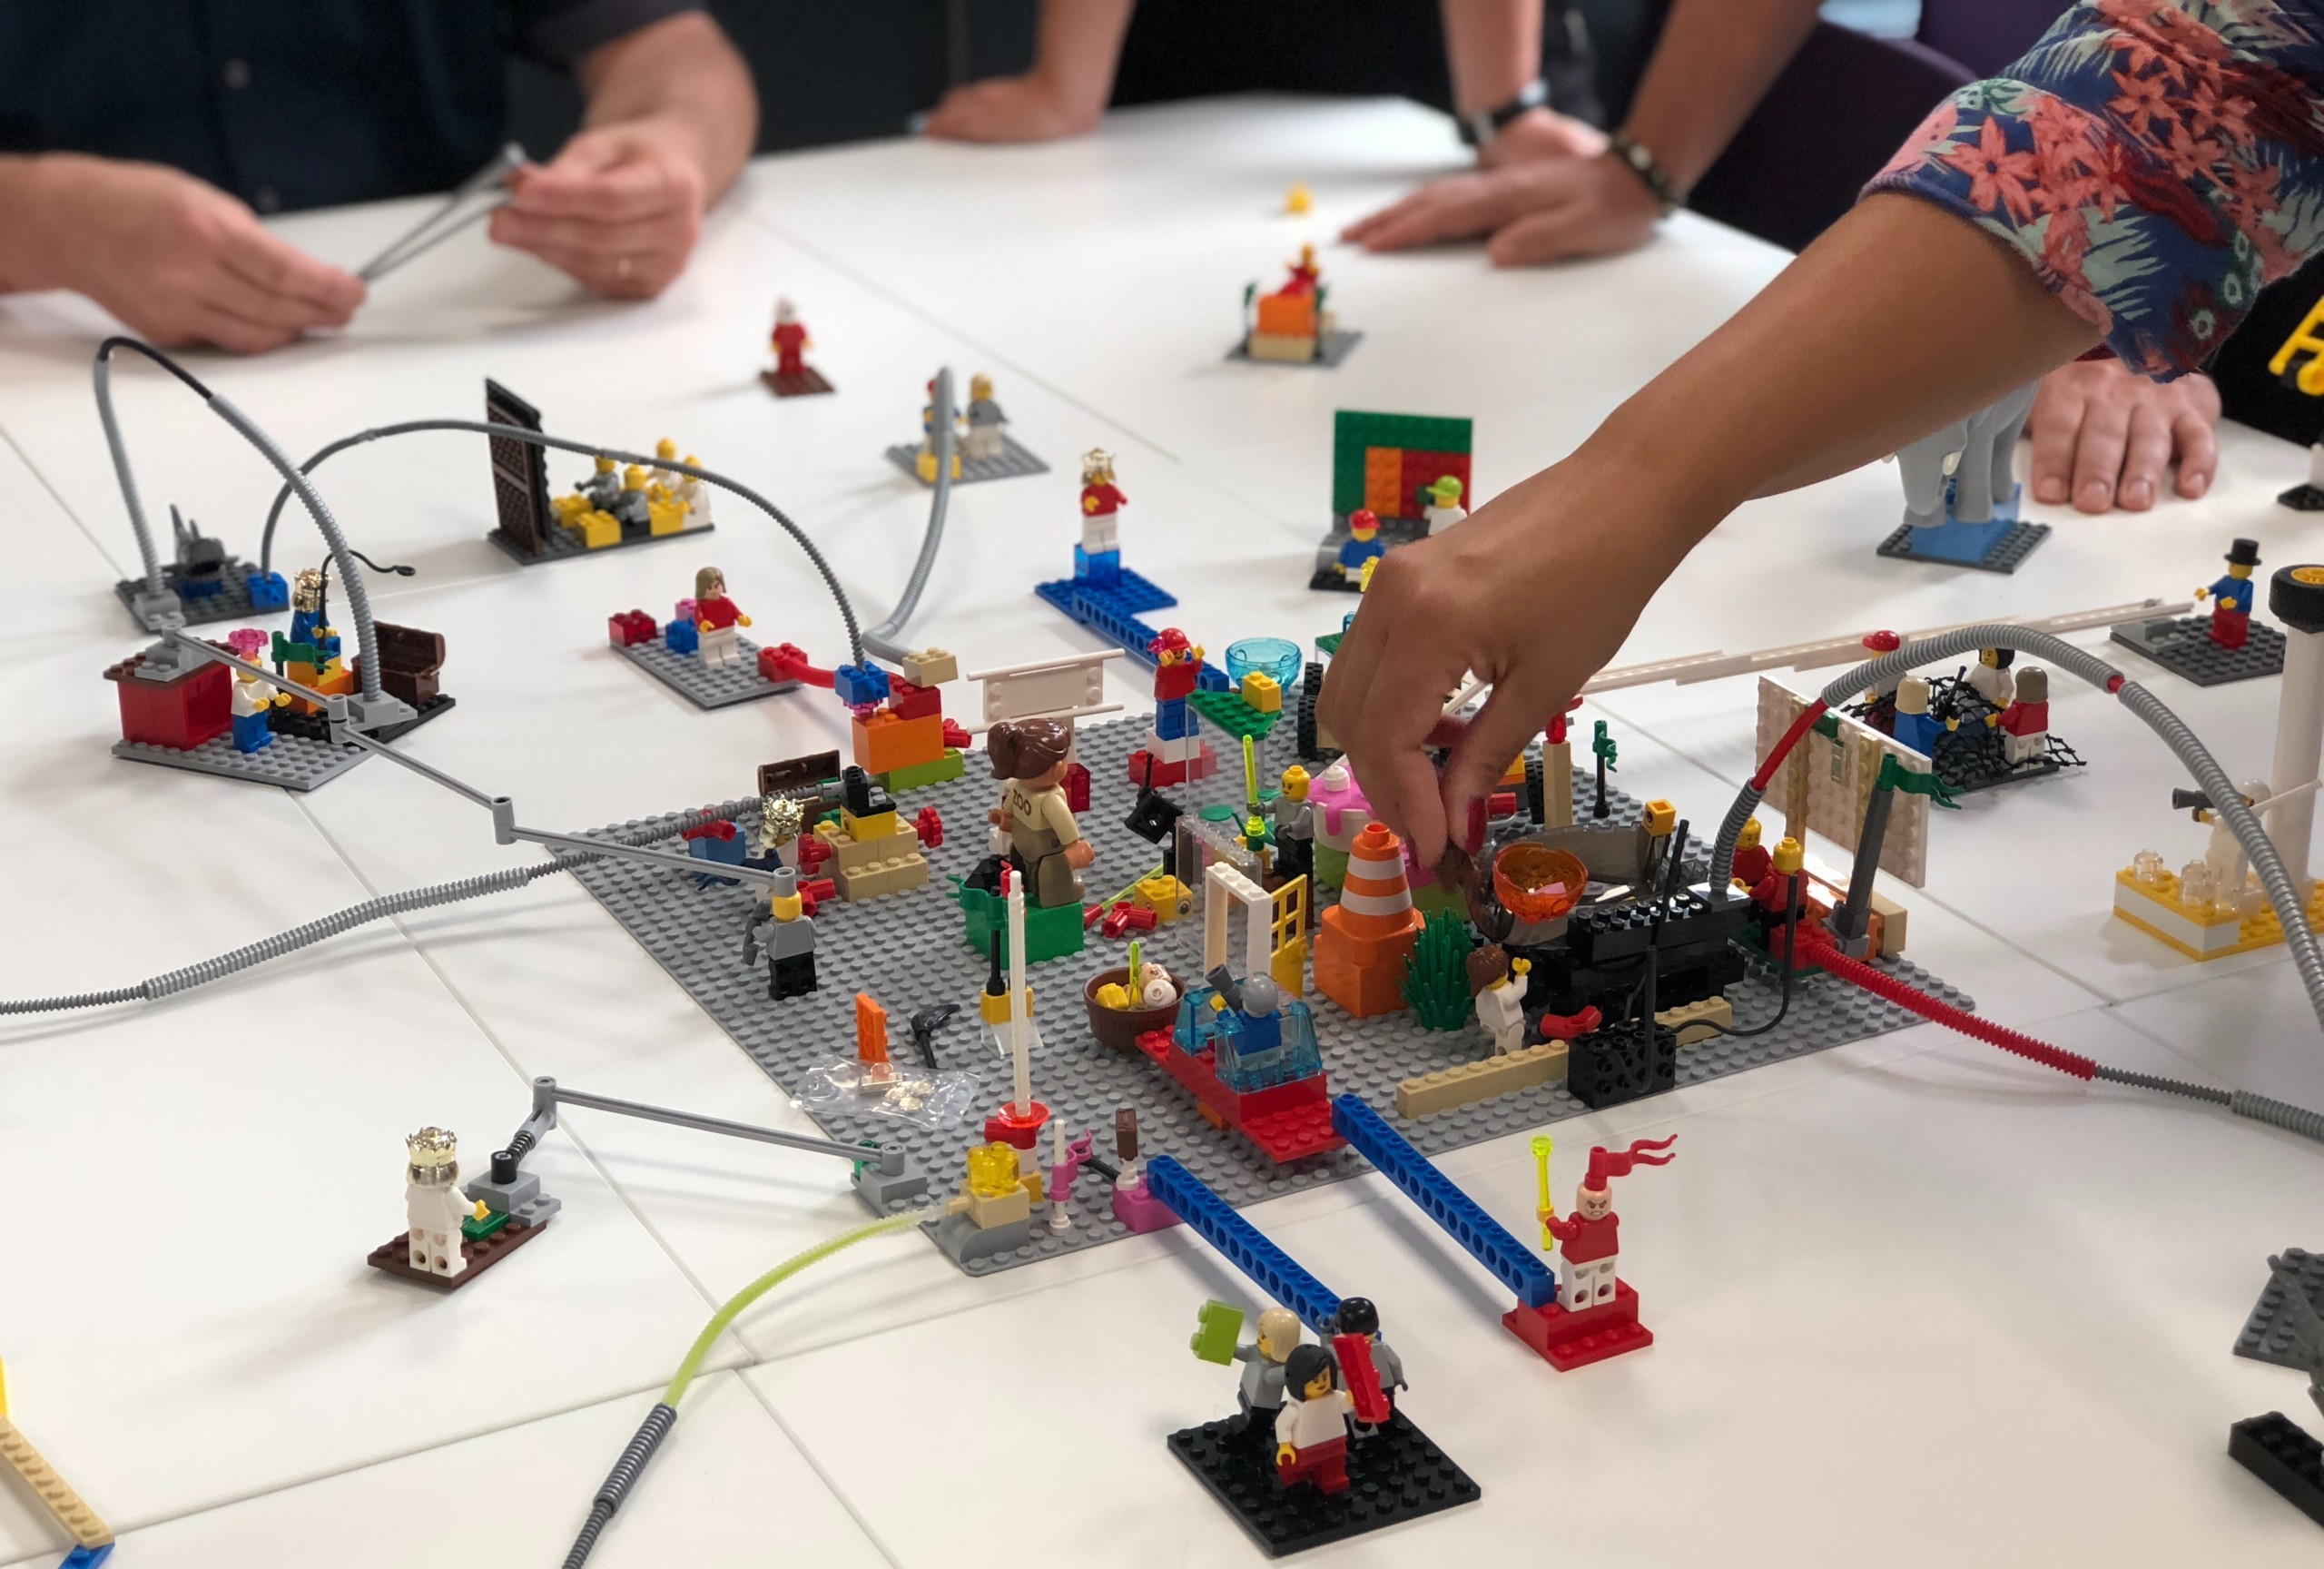 a group building lego which is an example of design democratization